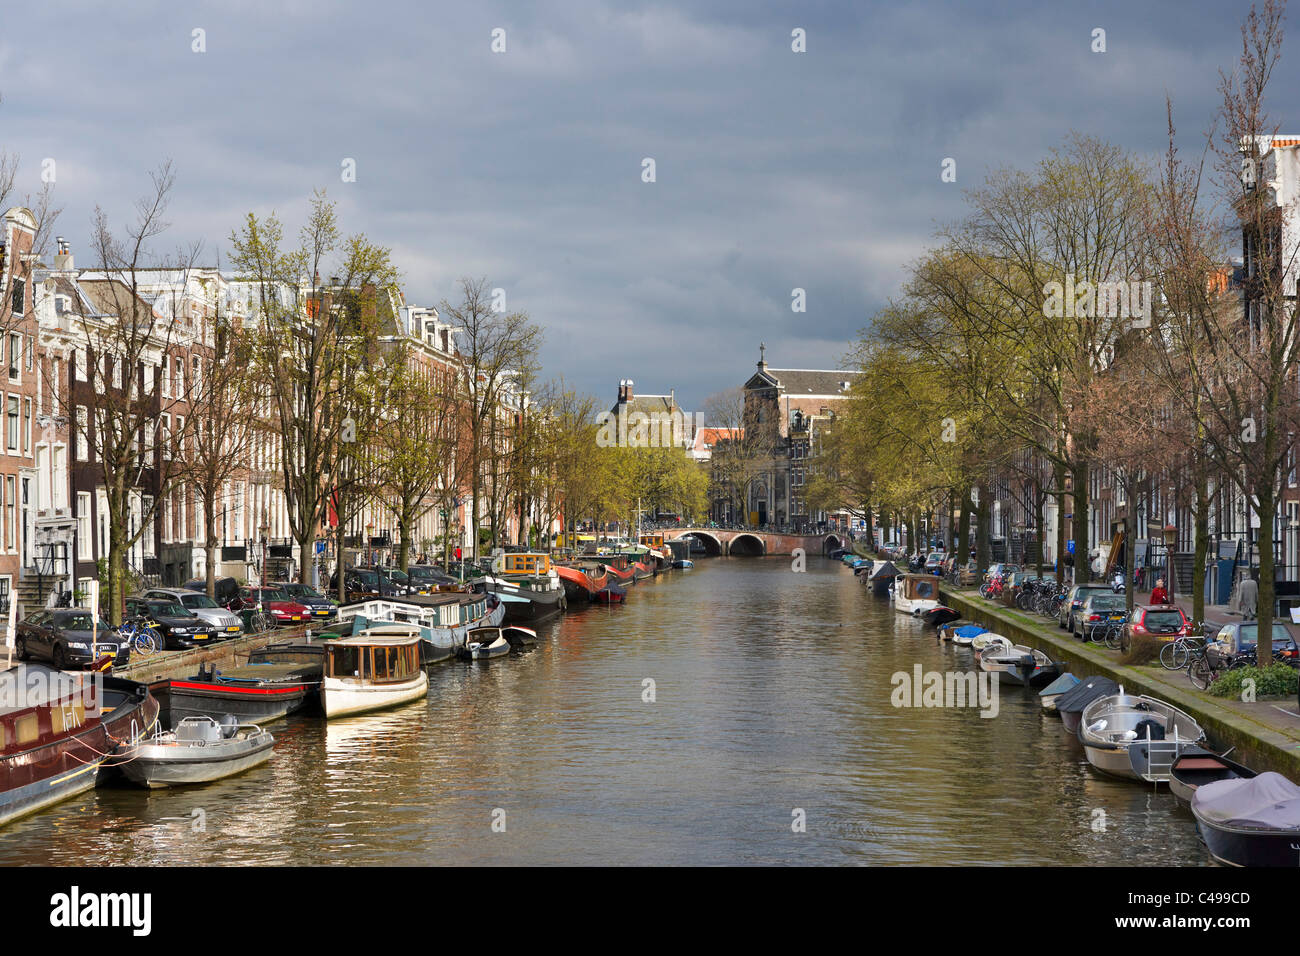 Houses and boats on a canal in early spring/late winter, Prinsengracht, Grachtengordel south, Amsterdam, Netherlands Stock Photo